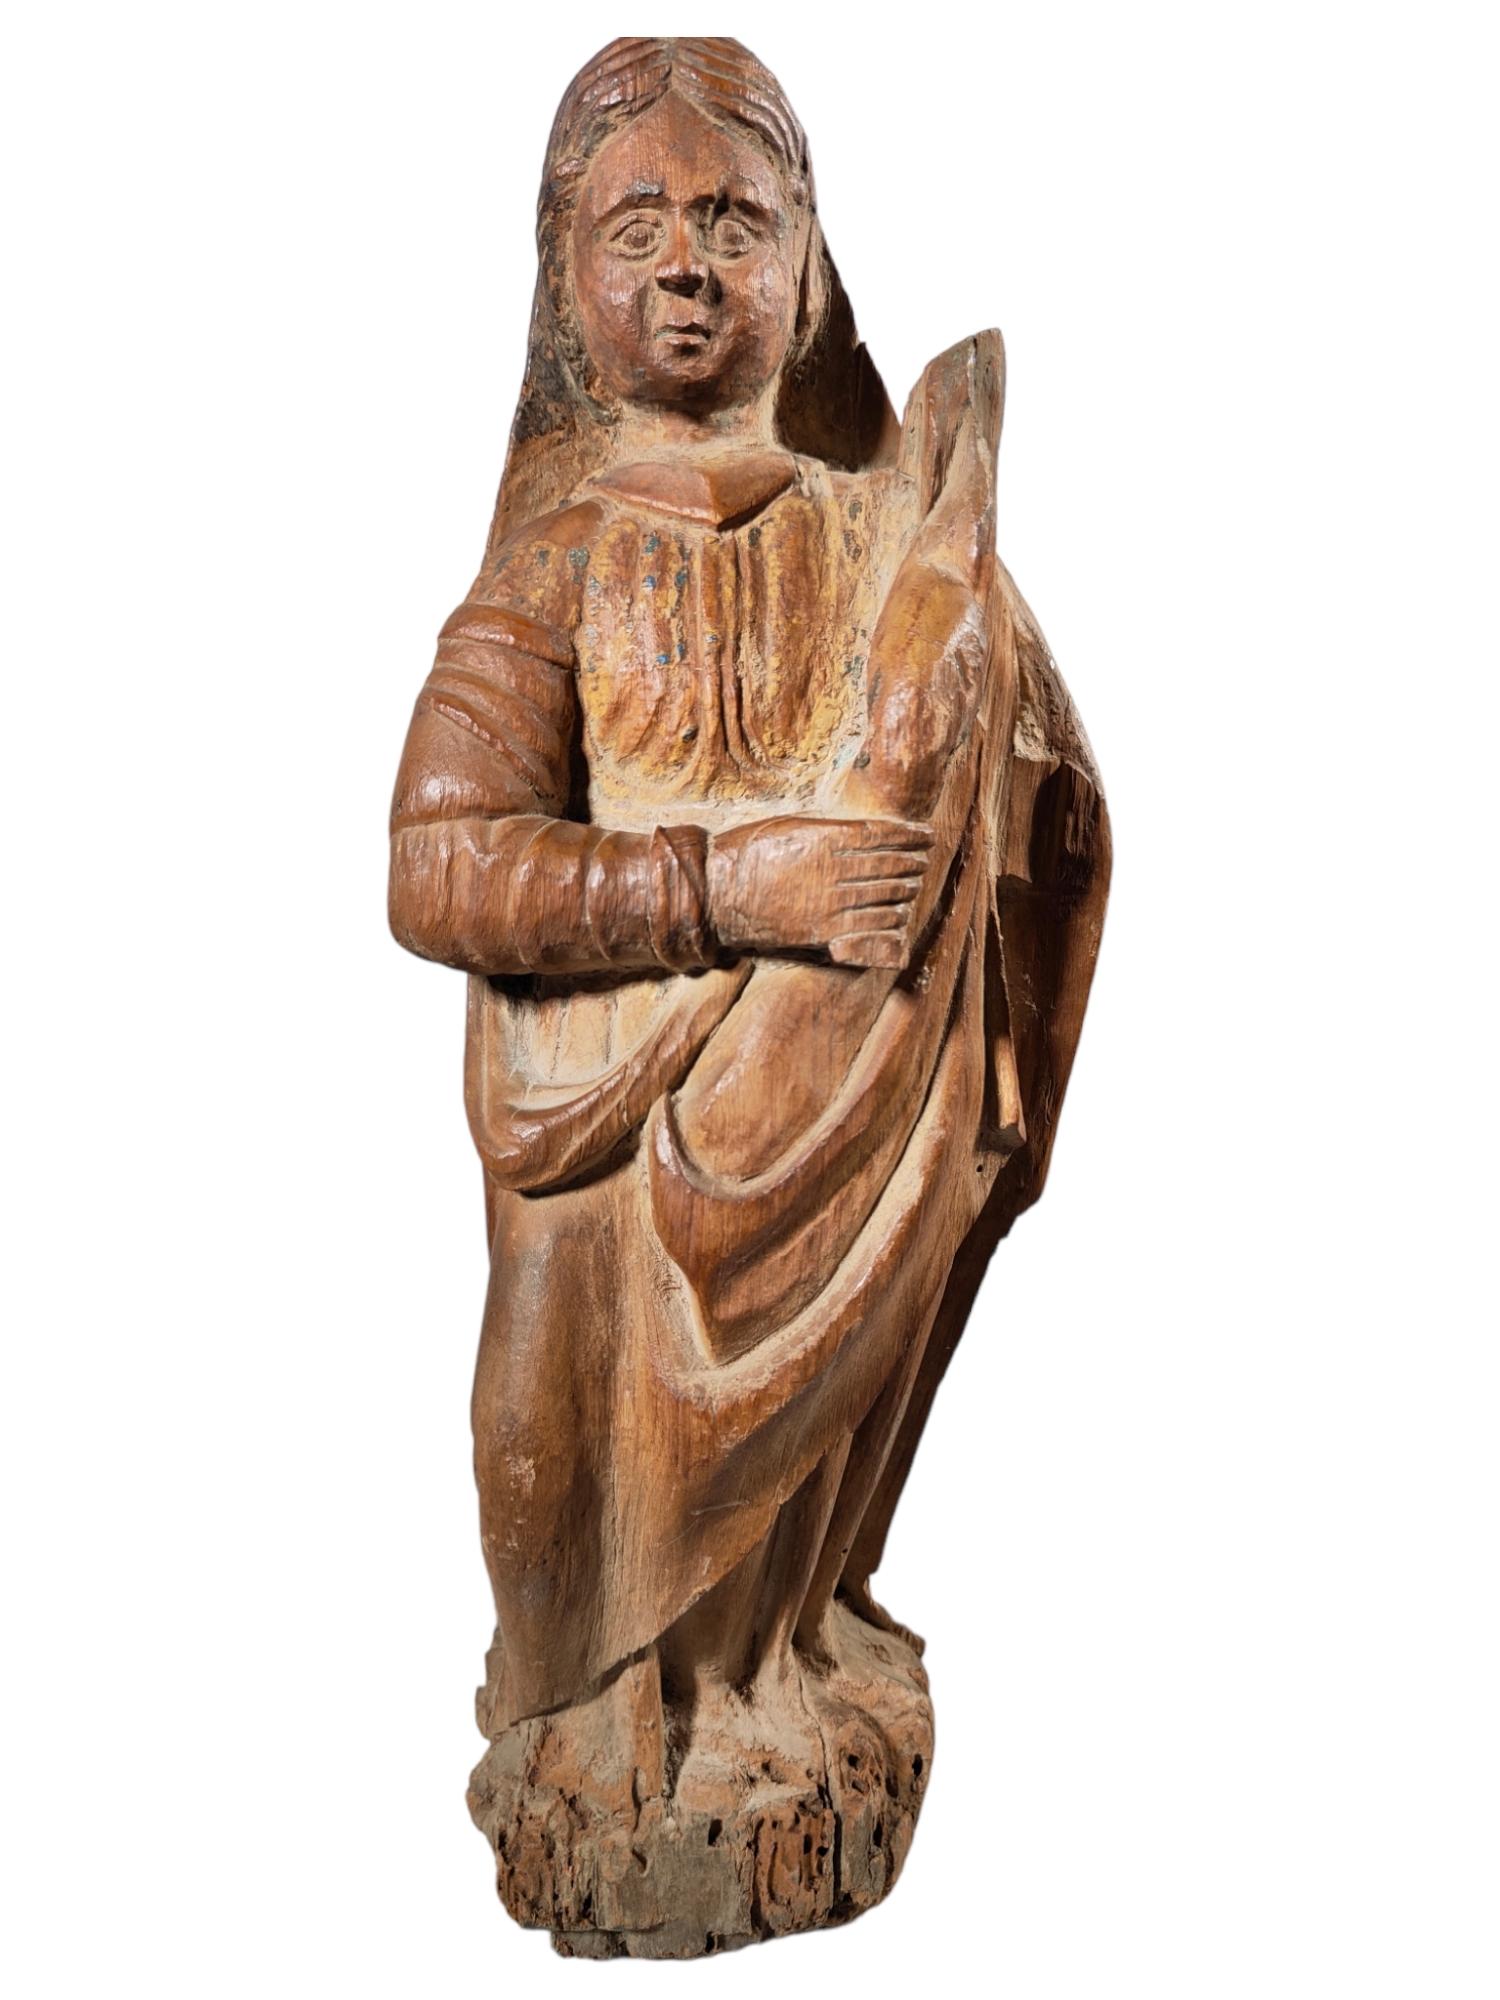 Virgin Mary in wood from the 16th century
Ancient wooden Madonna partly painted in wood of the 16th century in his arms he had the child Jesus.It is a sculpture with a special charm, so it is very primitive. Measures: 40x14x9 cm.